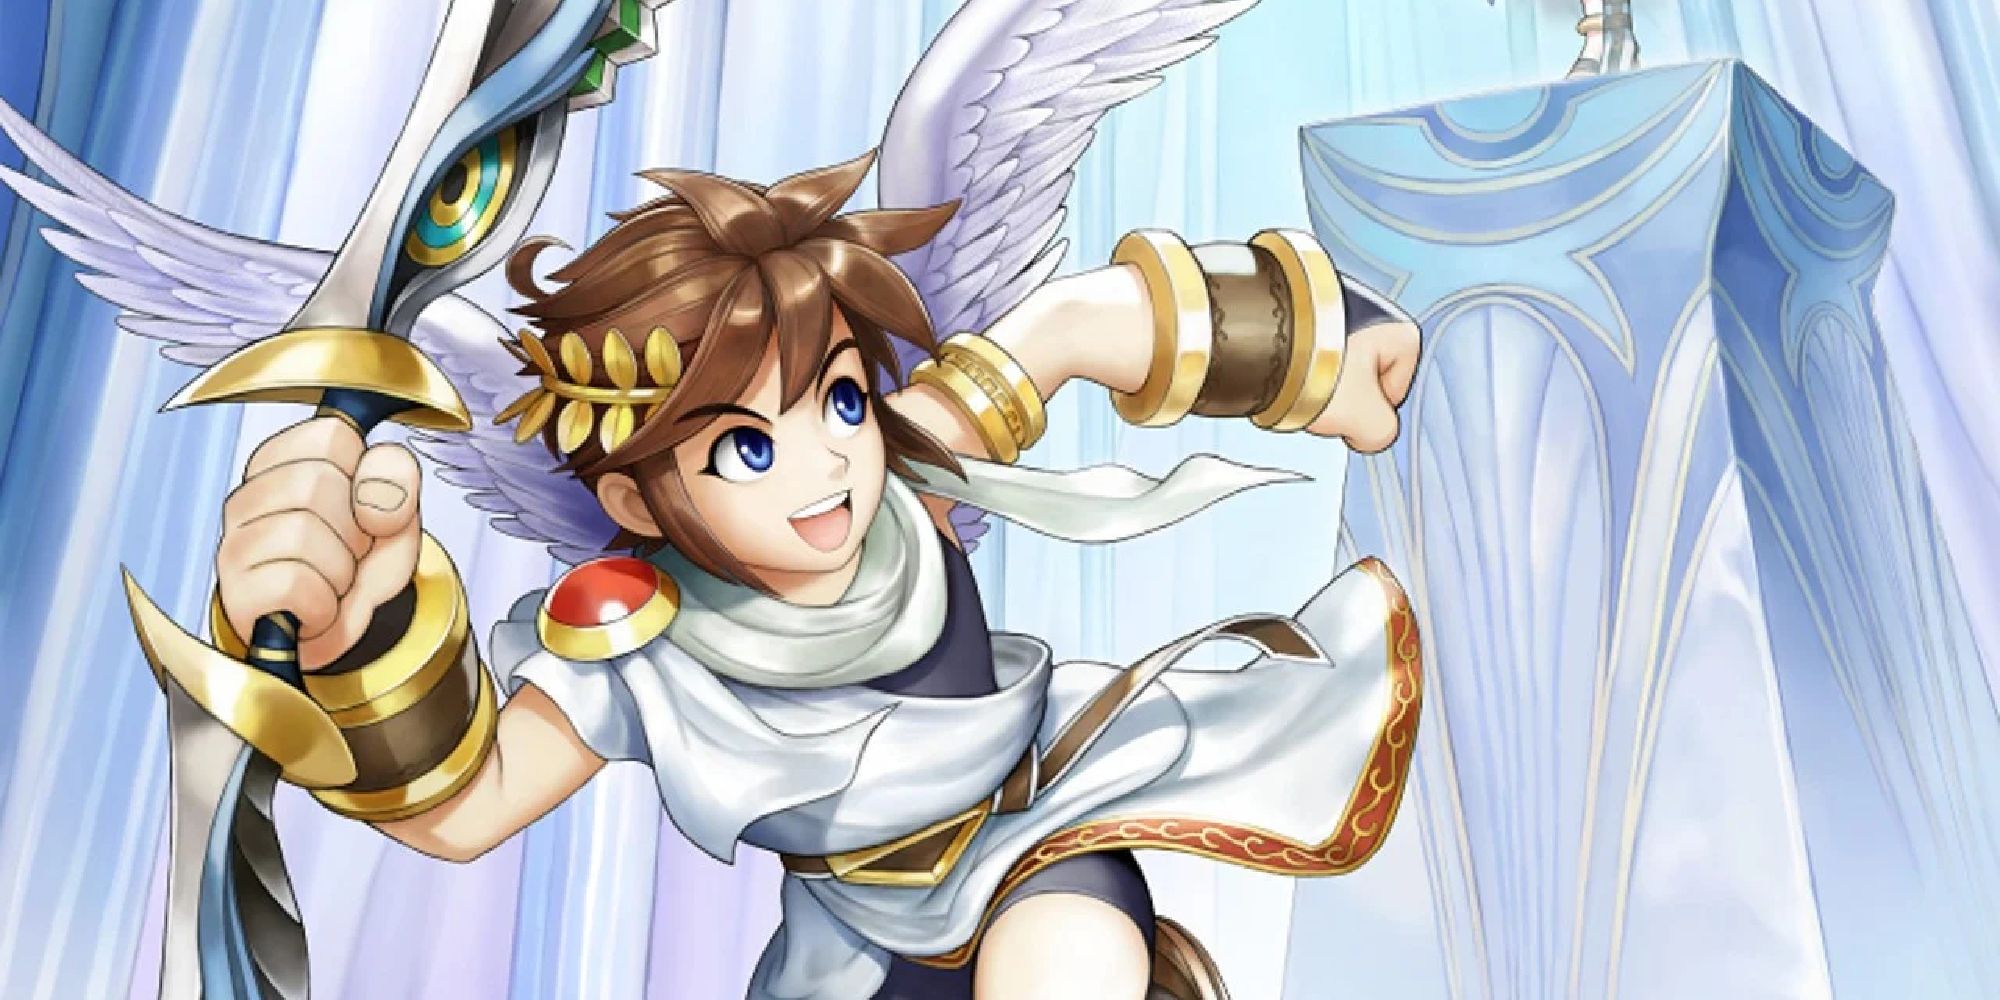 Icarus running with his bow in hand, a smile on his face as he glances back over his shoulder.